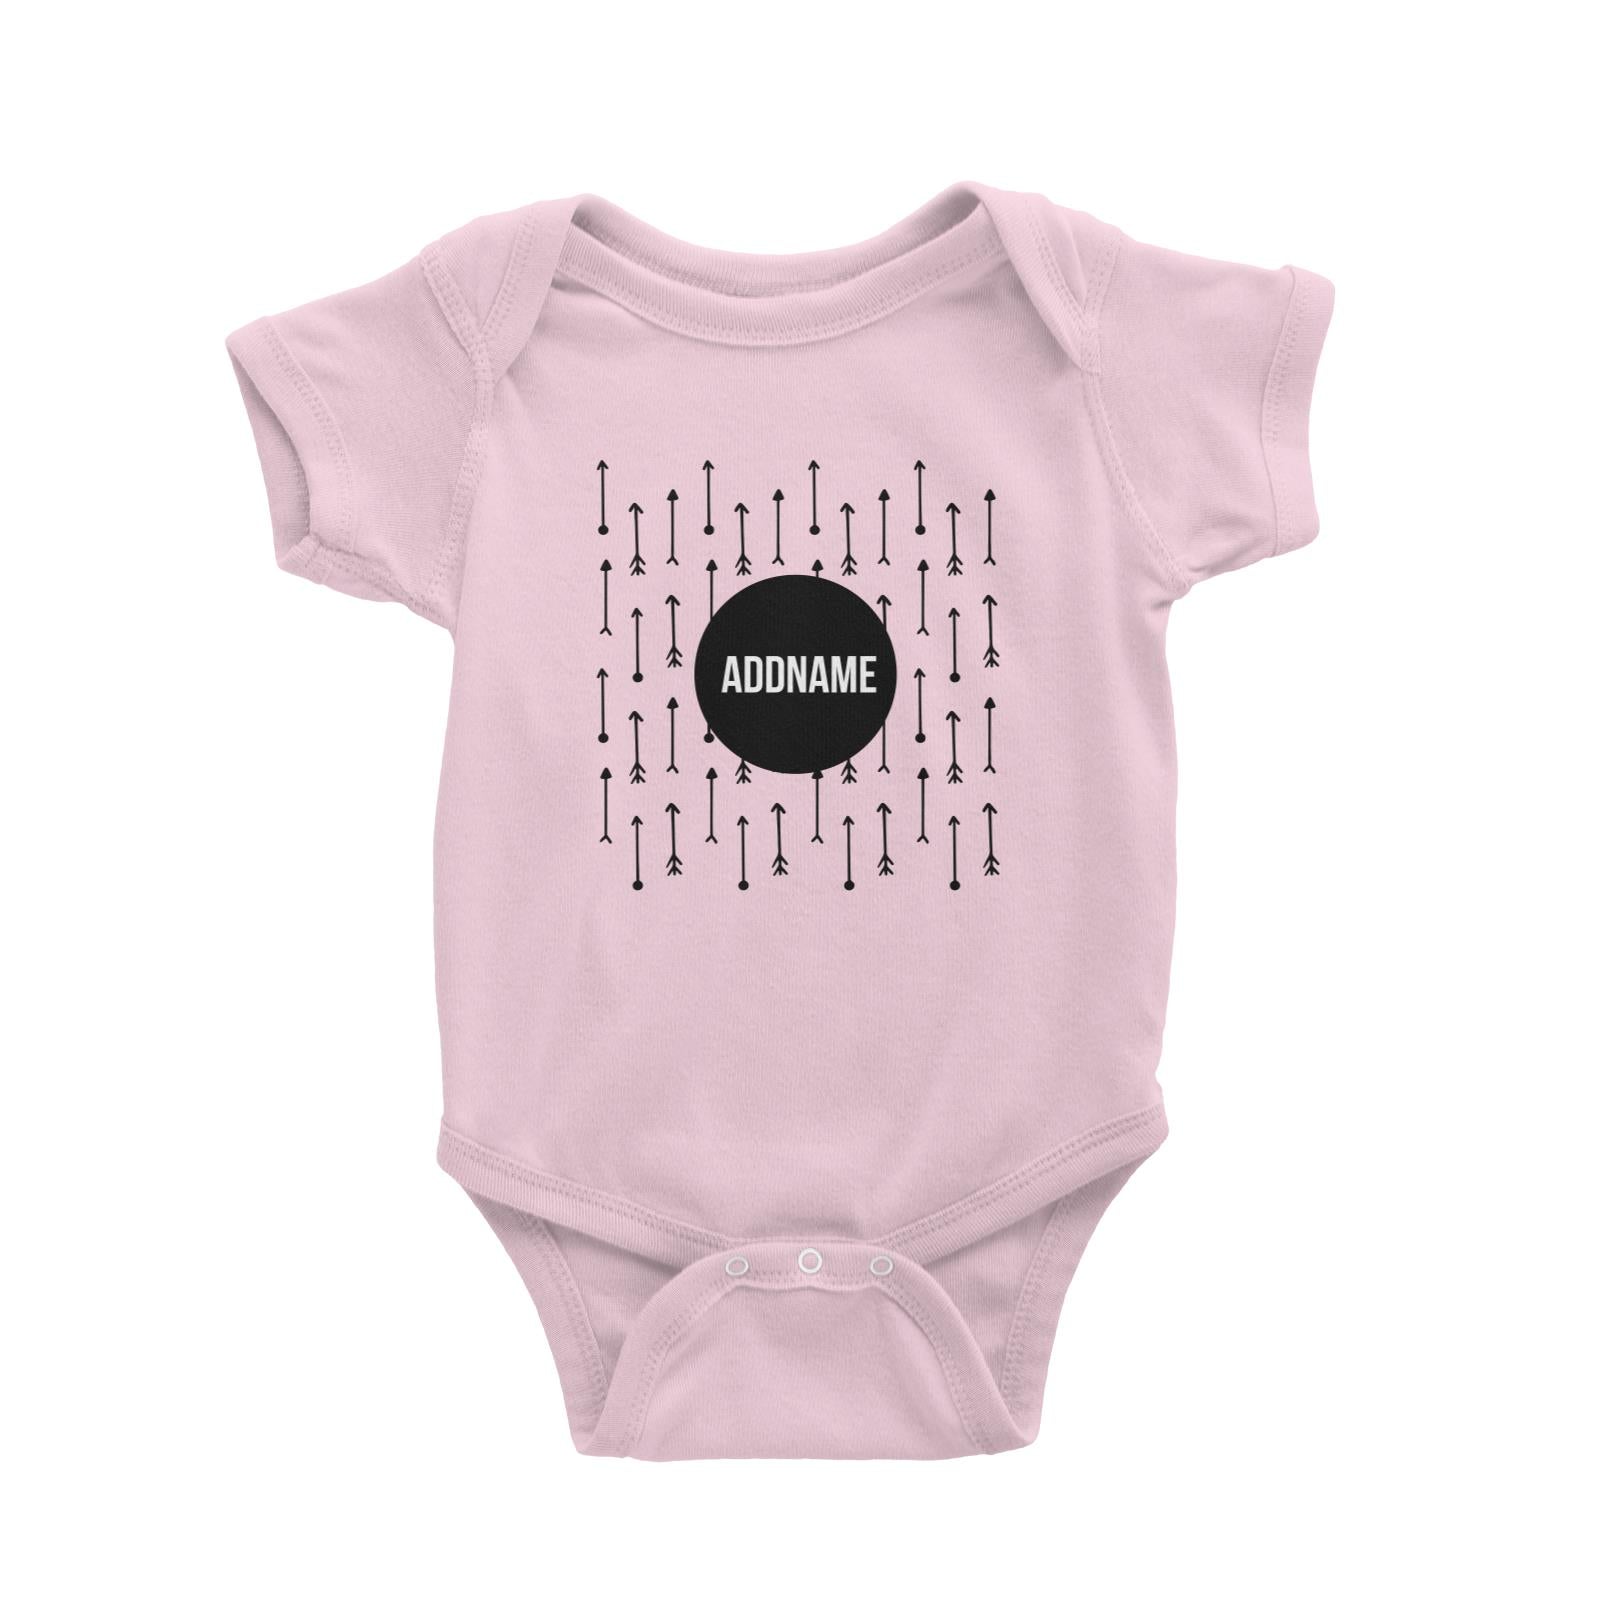 Monochrome Black Circle with Arrows Addname Baby Romper